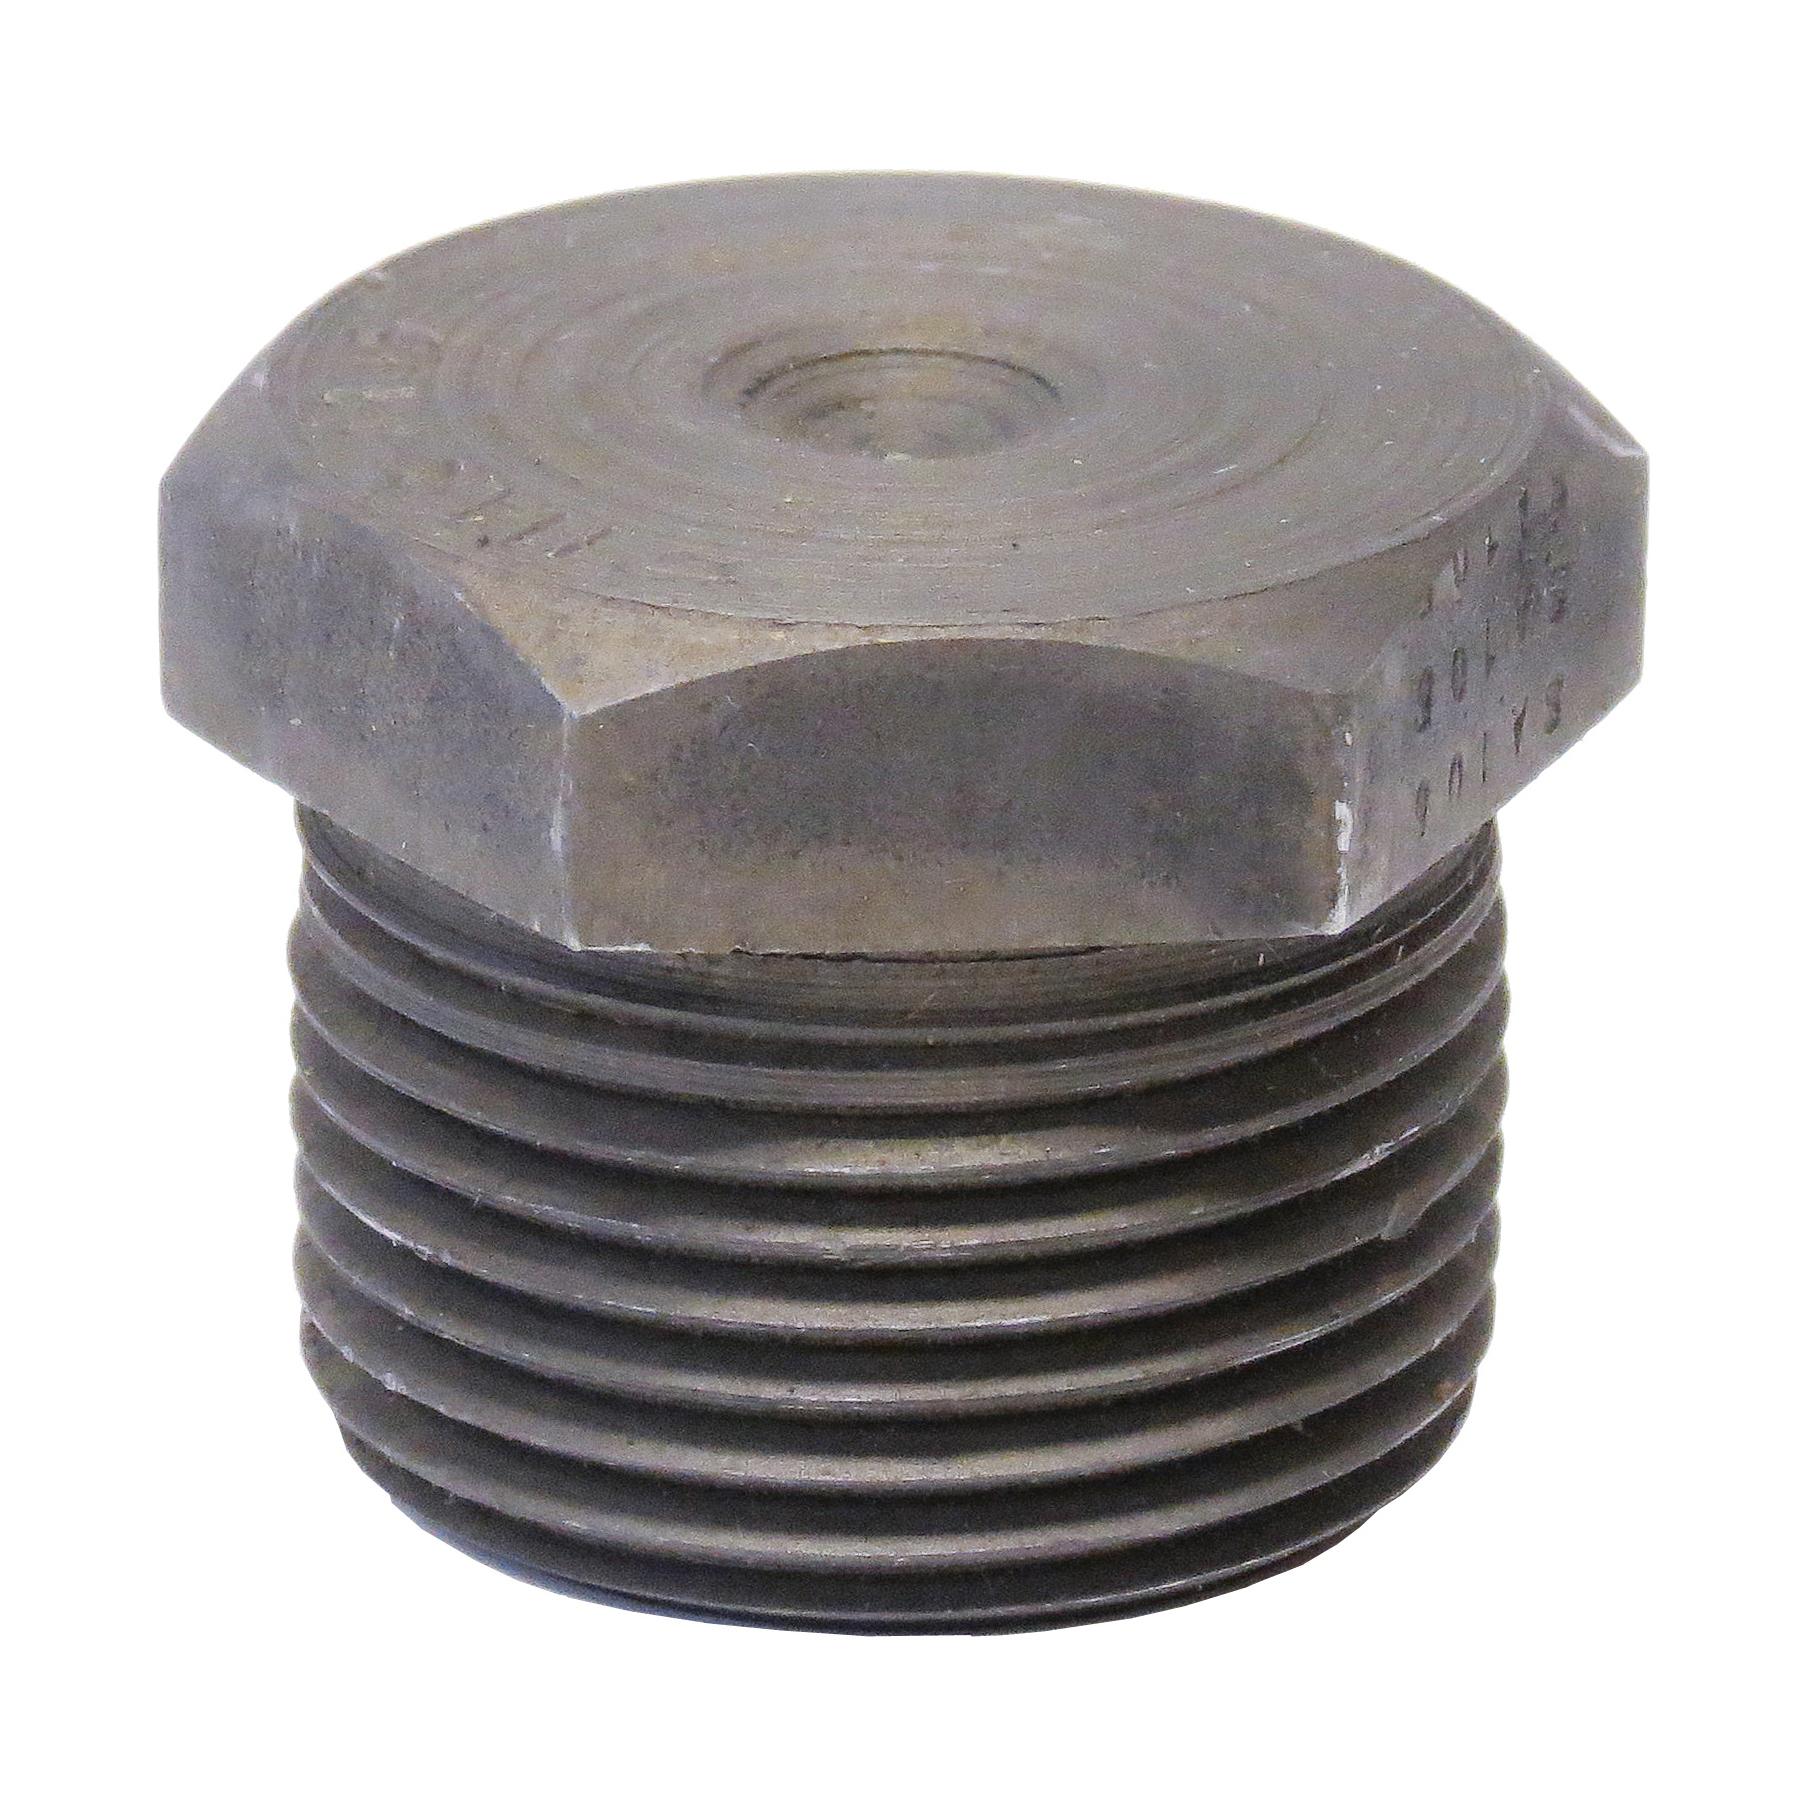 Anvil® 0361312804 FIG 2142 Hex Head Pipe Plug, 3/8 in Nominal, MNPT End Style, 3000 lb, Steel, Black Oxide, Domestic